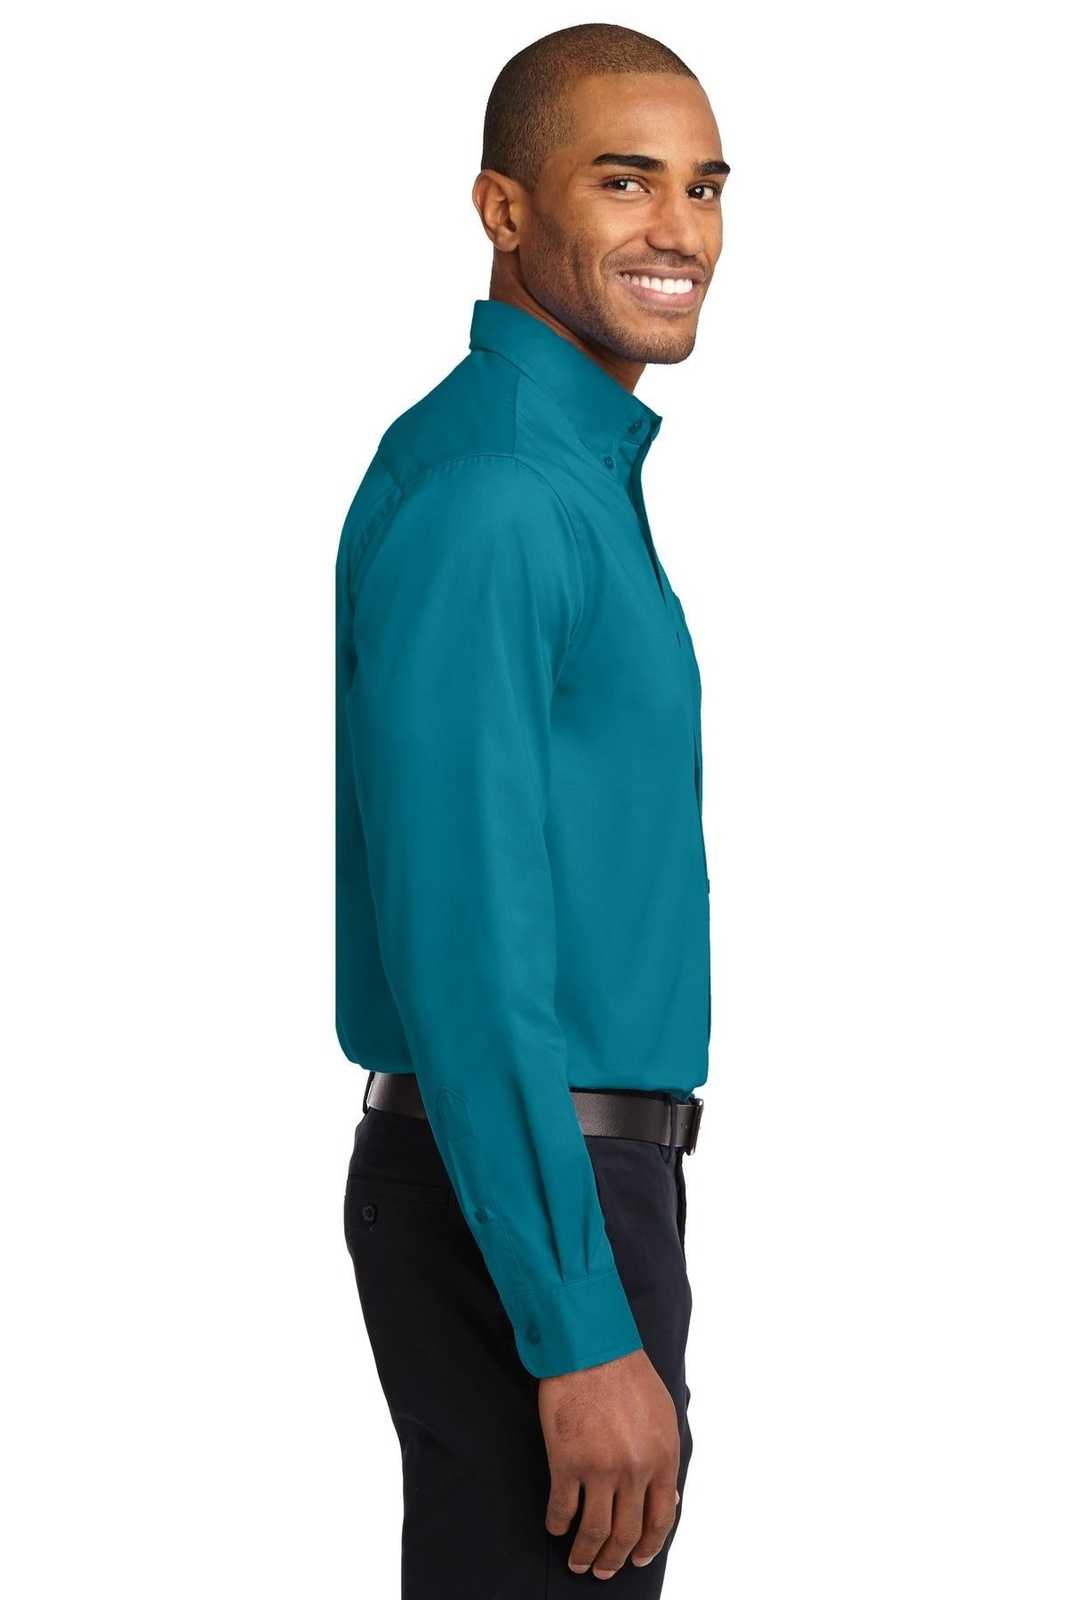 Port Authority S608 Long Sleeve Easy Care Shirt - Teal Green - HIT a Double - 3